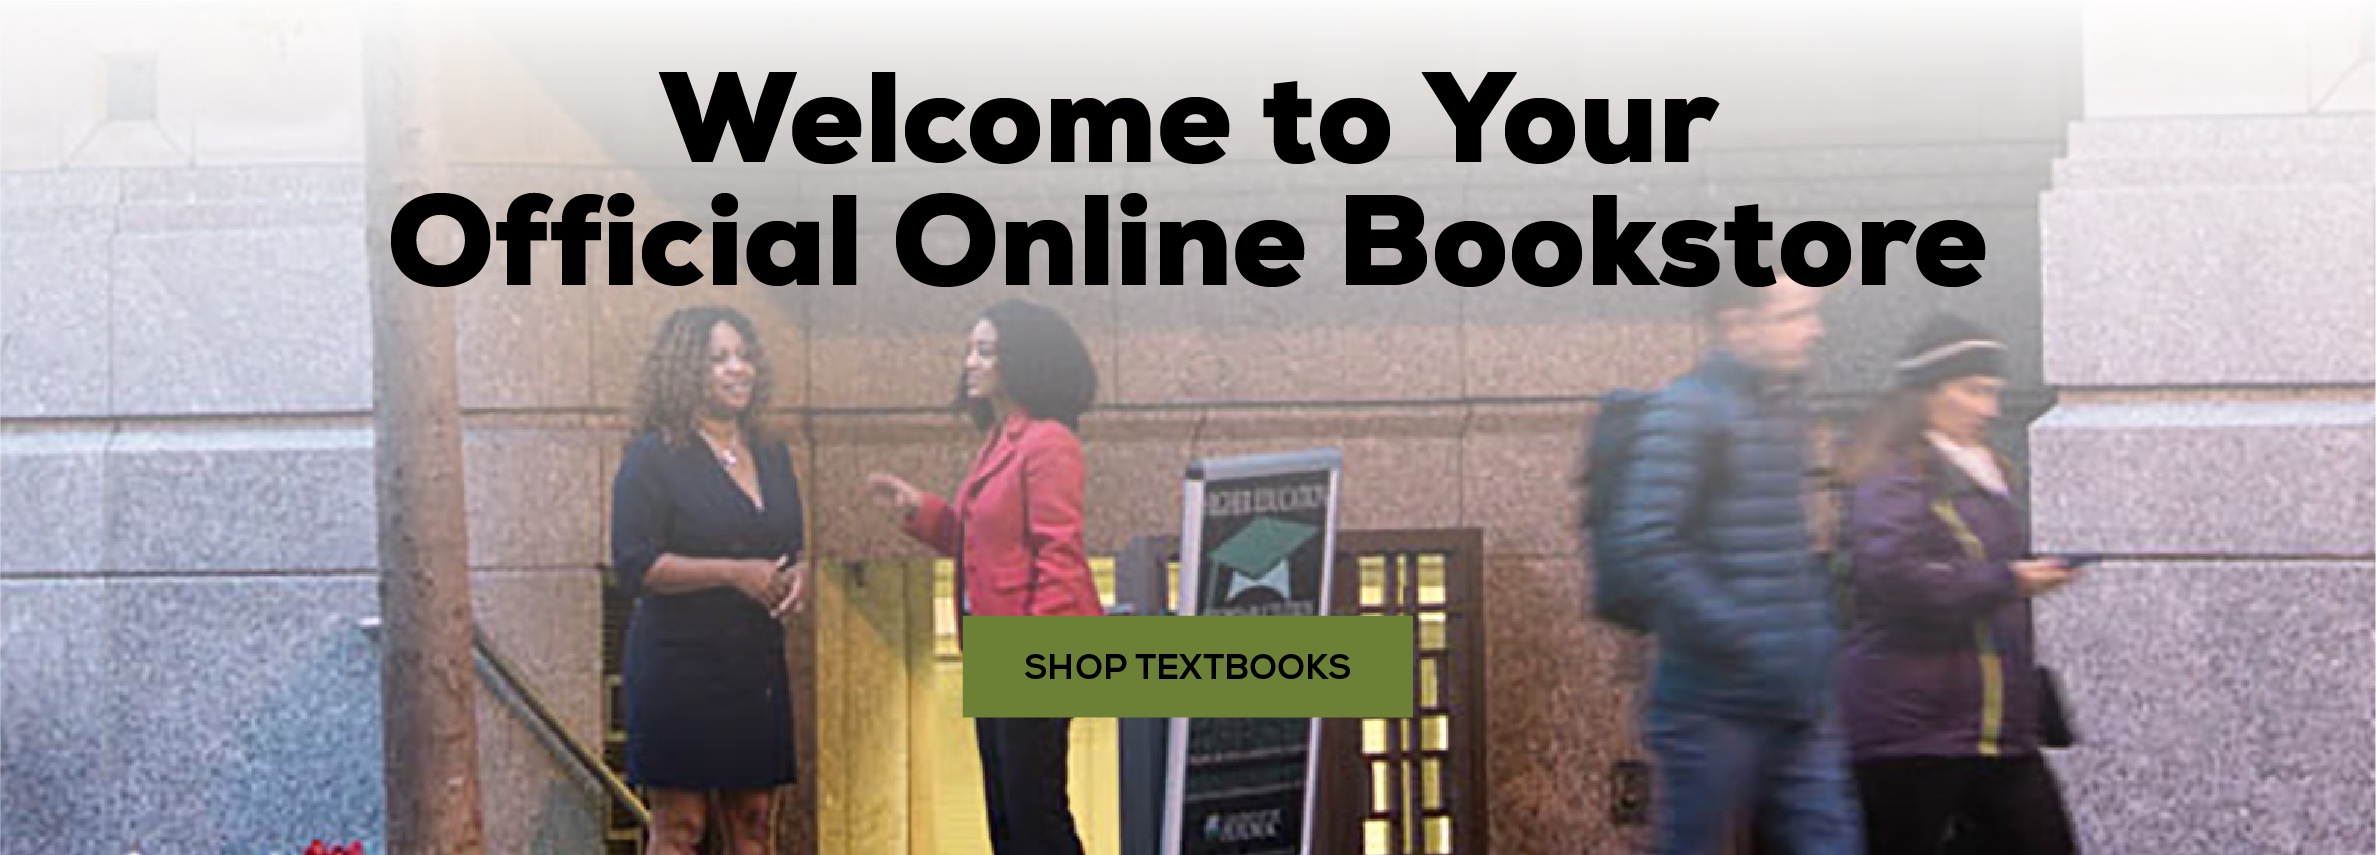 Welcome to Your Online Bookstore. Shop Textbooks